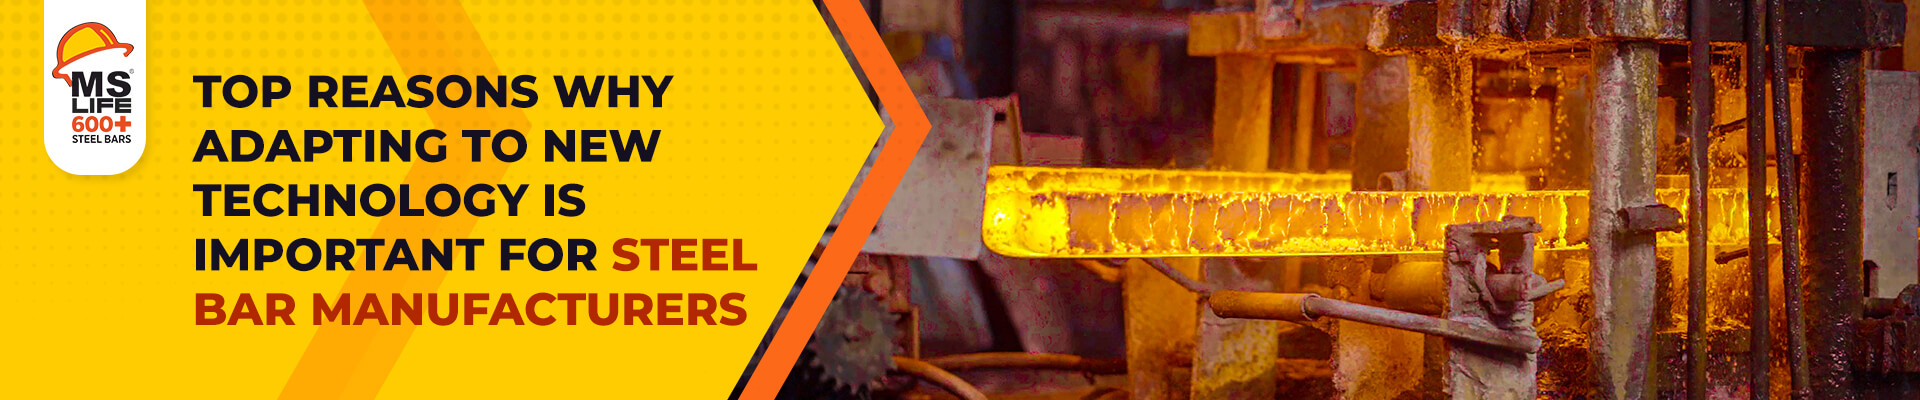 Top reasons why adapting to new technology is important for Steel Bar Manufacturers